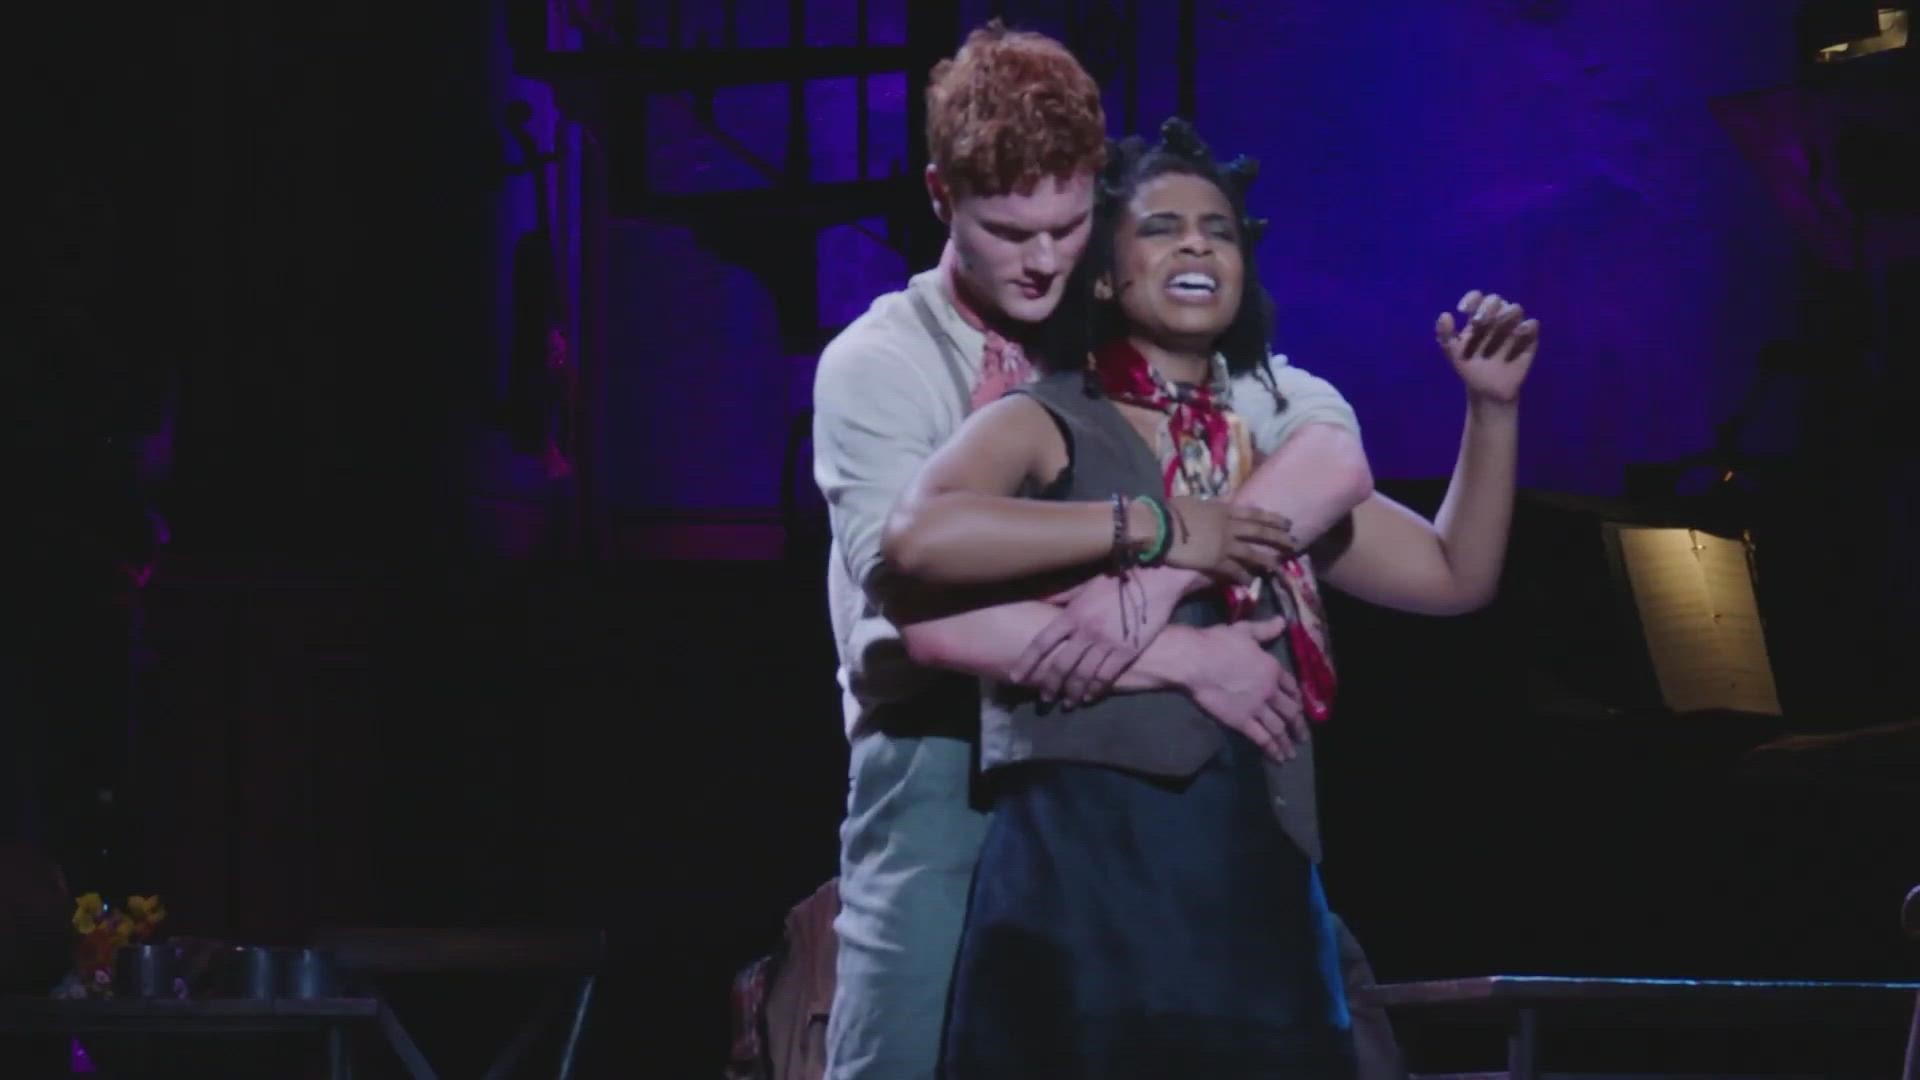 Hadestown will be on stage from Feb. 1 - Feb 6.